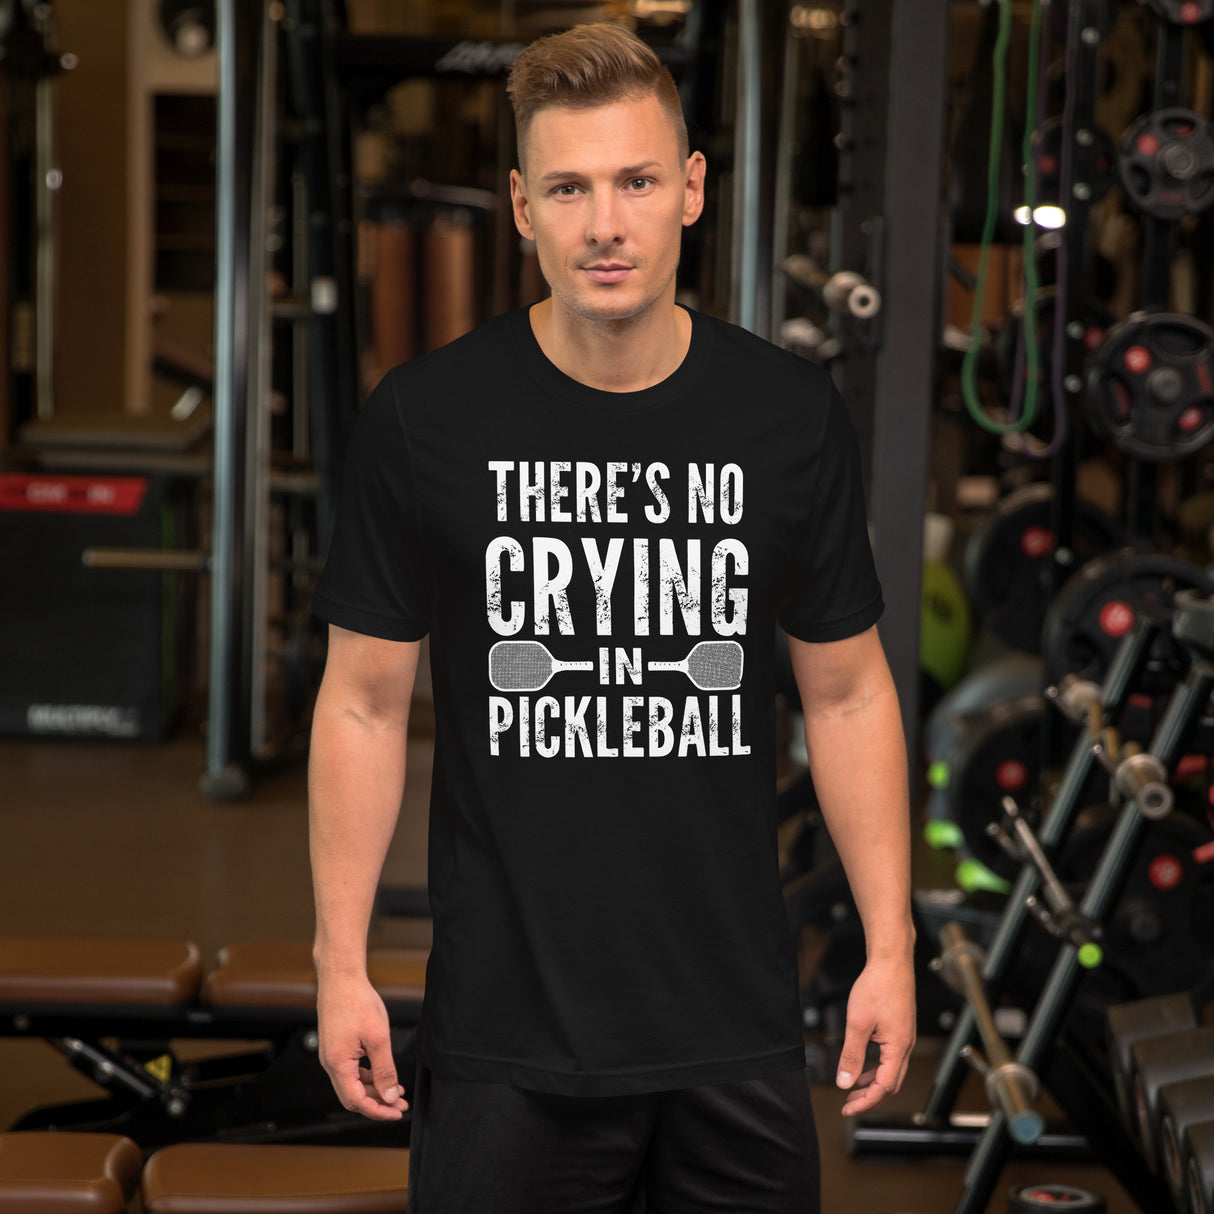 There's No Crying in Pickleball Men's Shirt